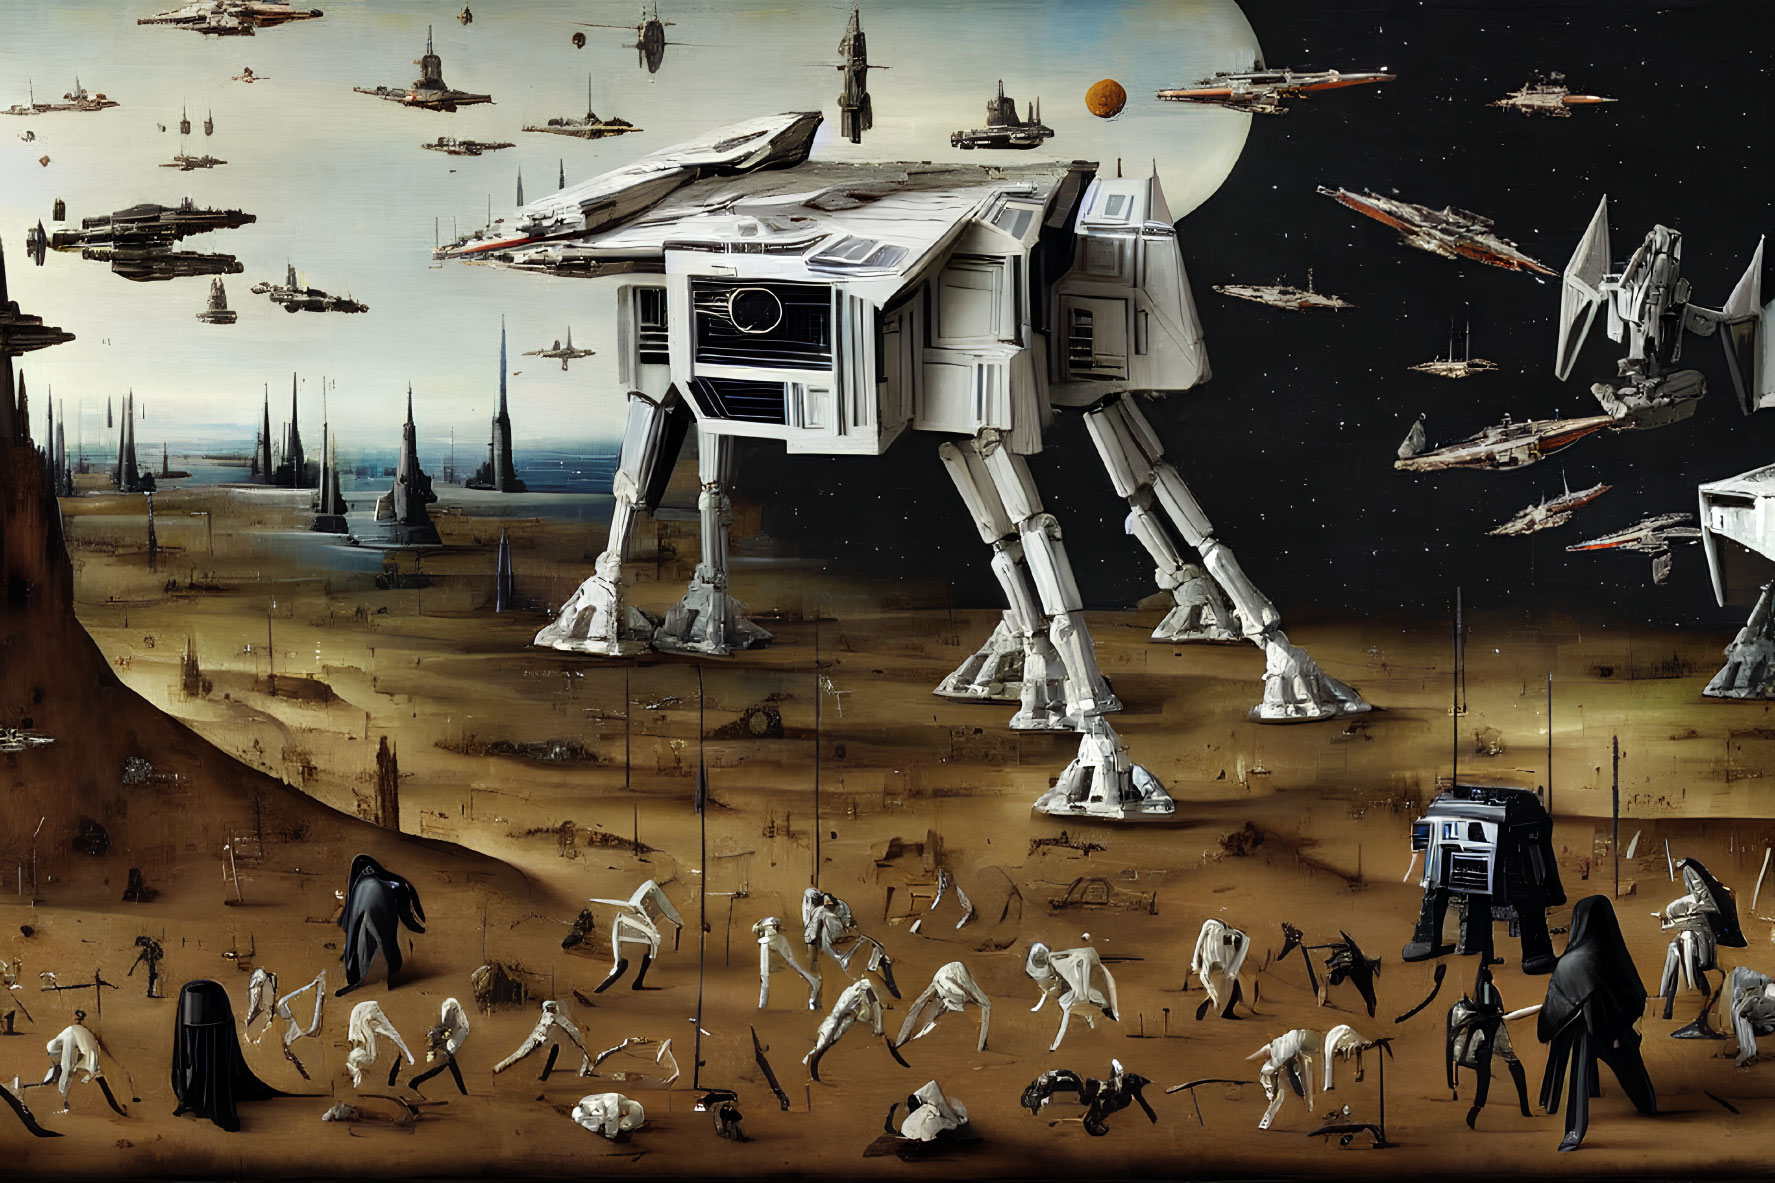 Sci-fi artwork featuring AT-AT walkers, spacecraft, Darth Vader, and desolate landscape.